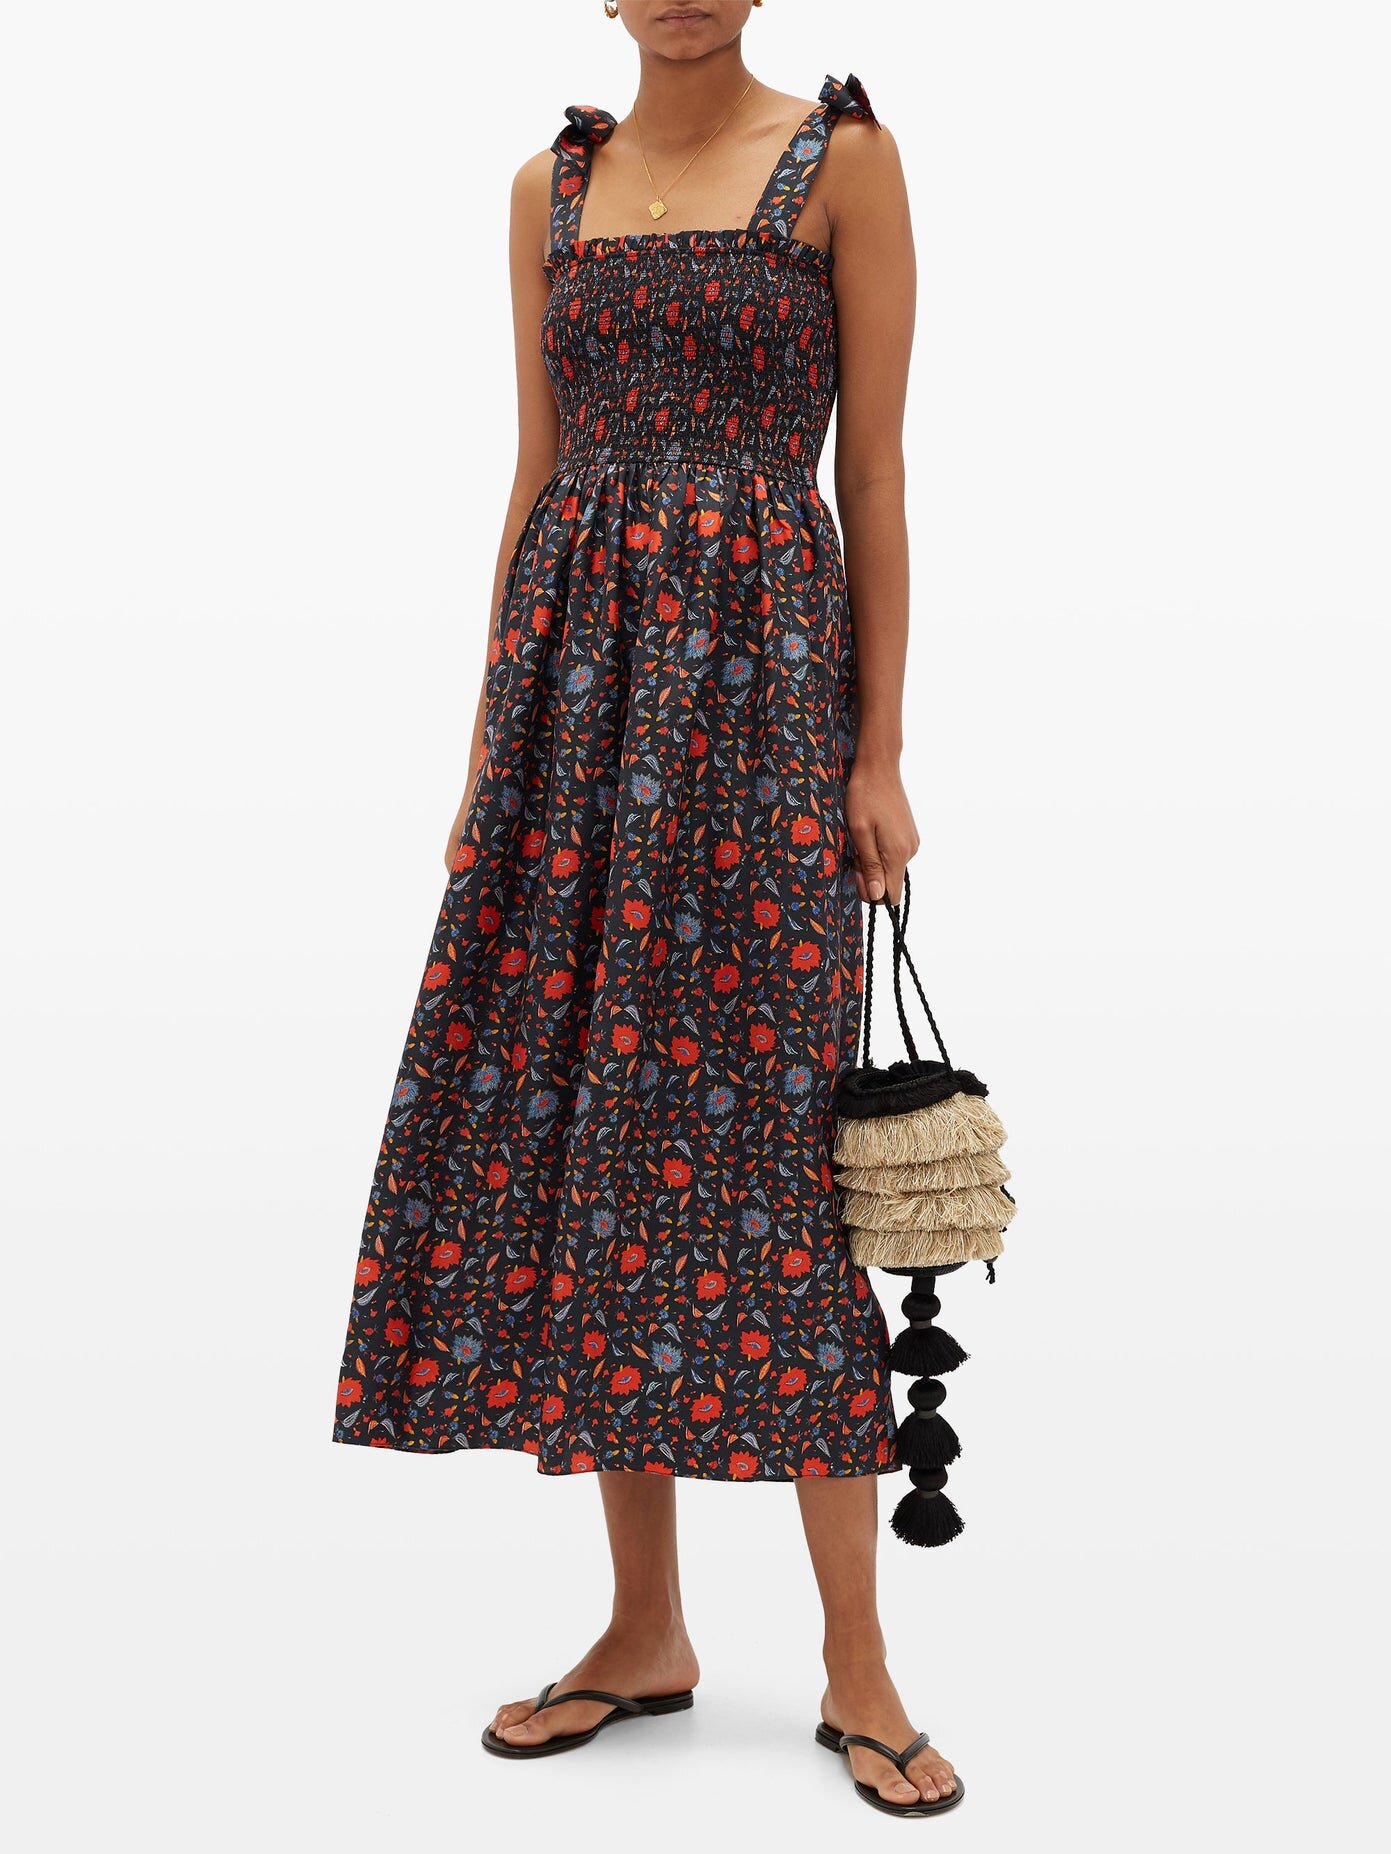 THE PRAIRIE DRESS TREND Timeless dresses to buy now and wear forever ...